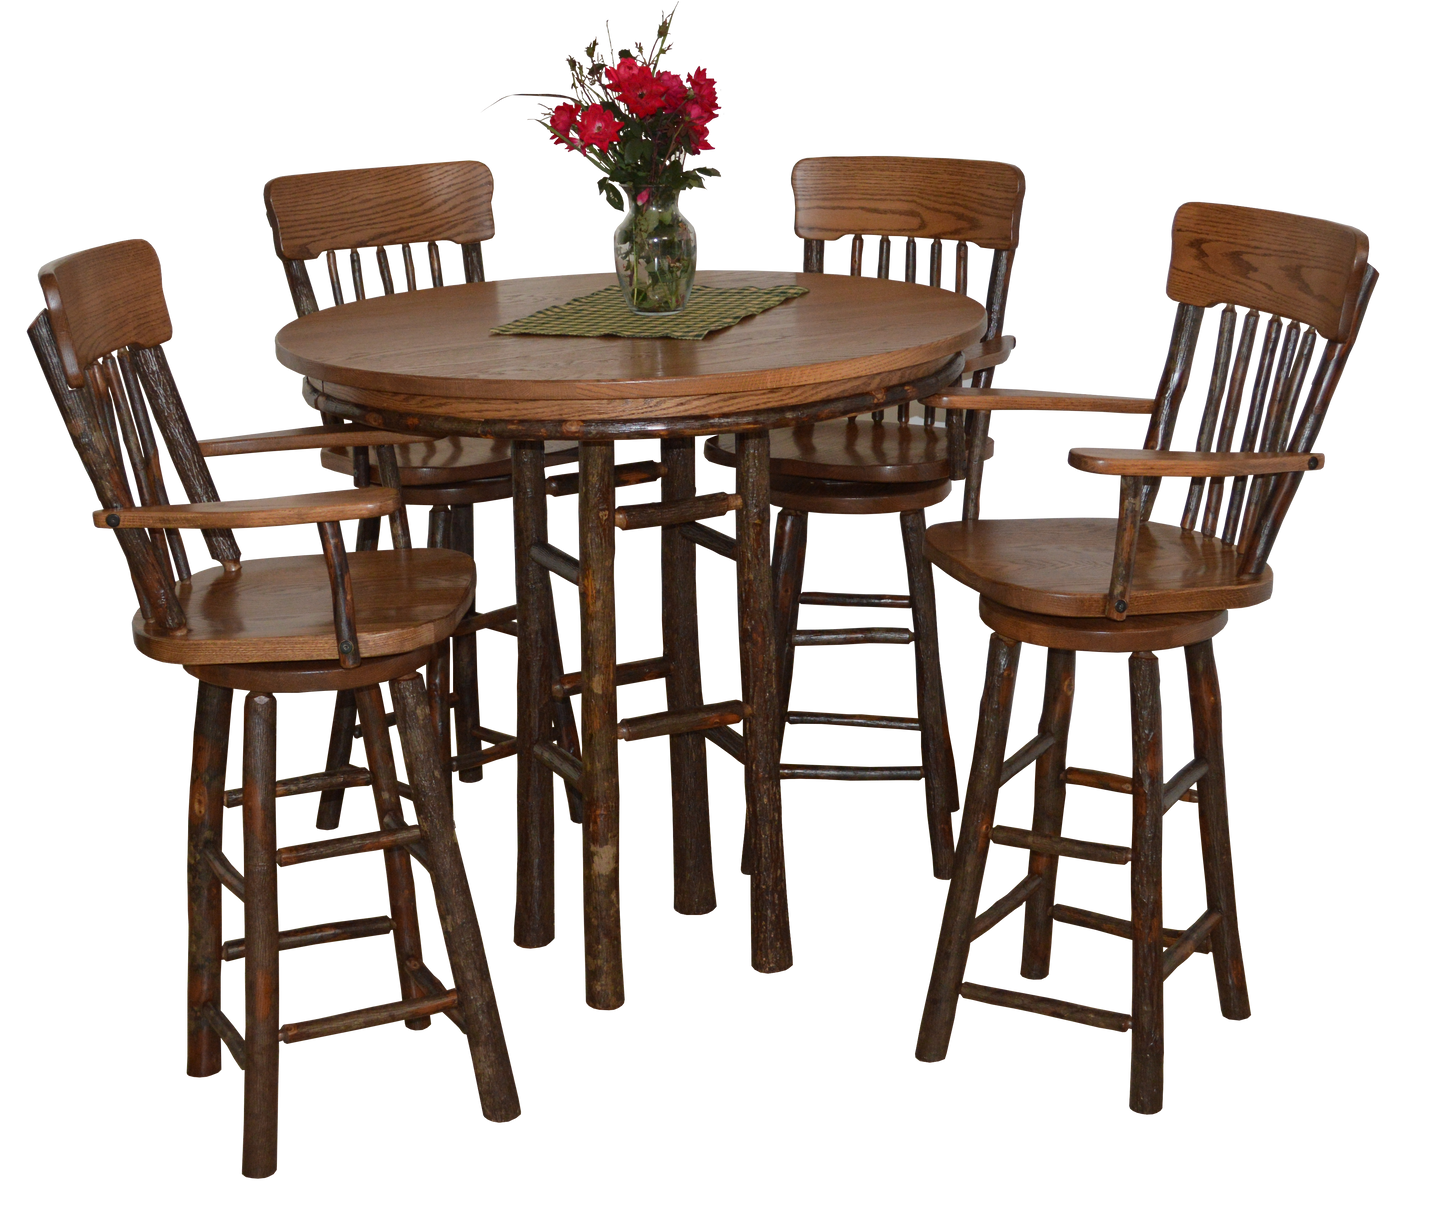 A&L Furniture Co. Hickory 5 Piece Bar Table Set w/ Hickory Panel Back Swivel Bar Chairs - LEAD TIME TO SHIP 10 BUSINESS DAYS